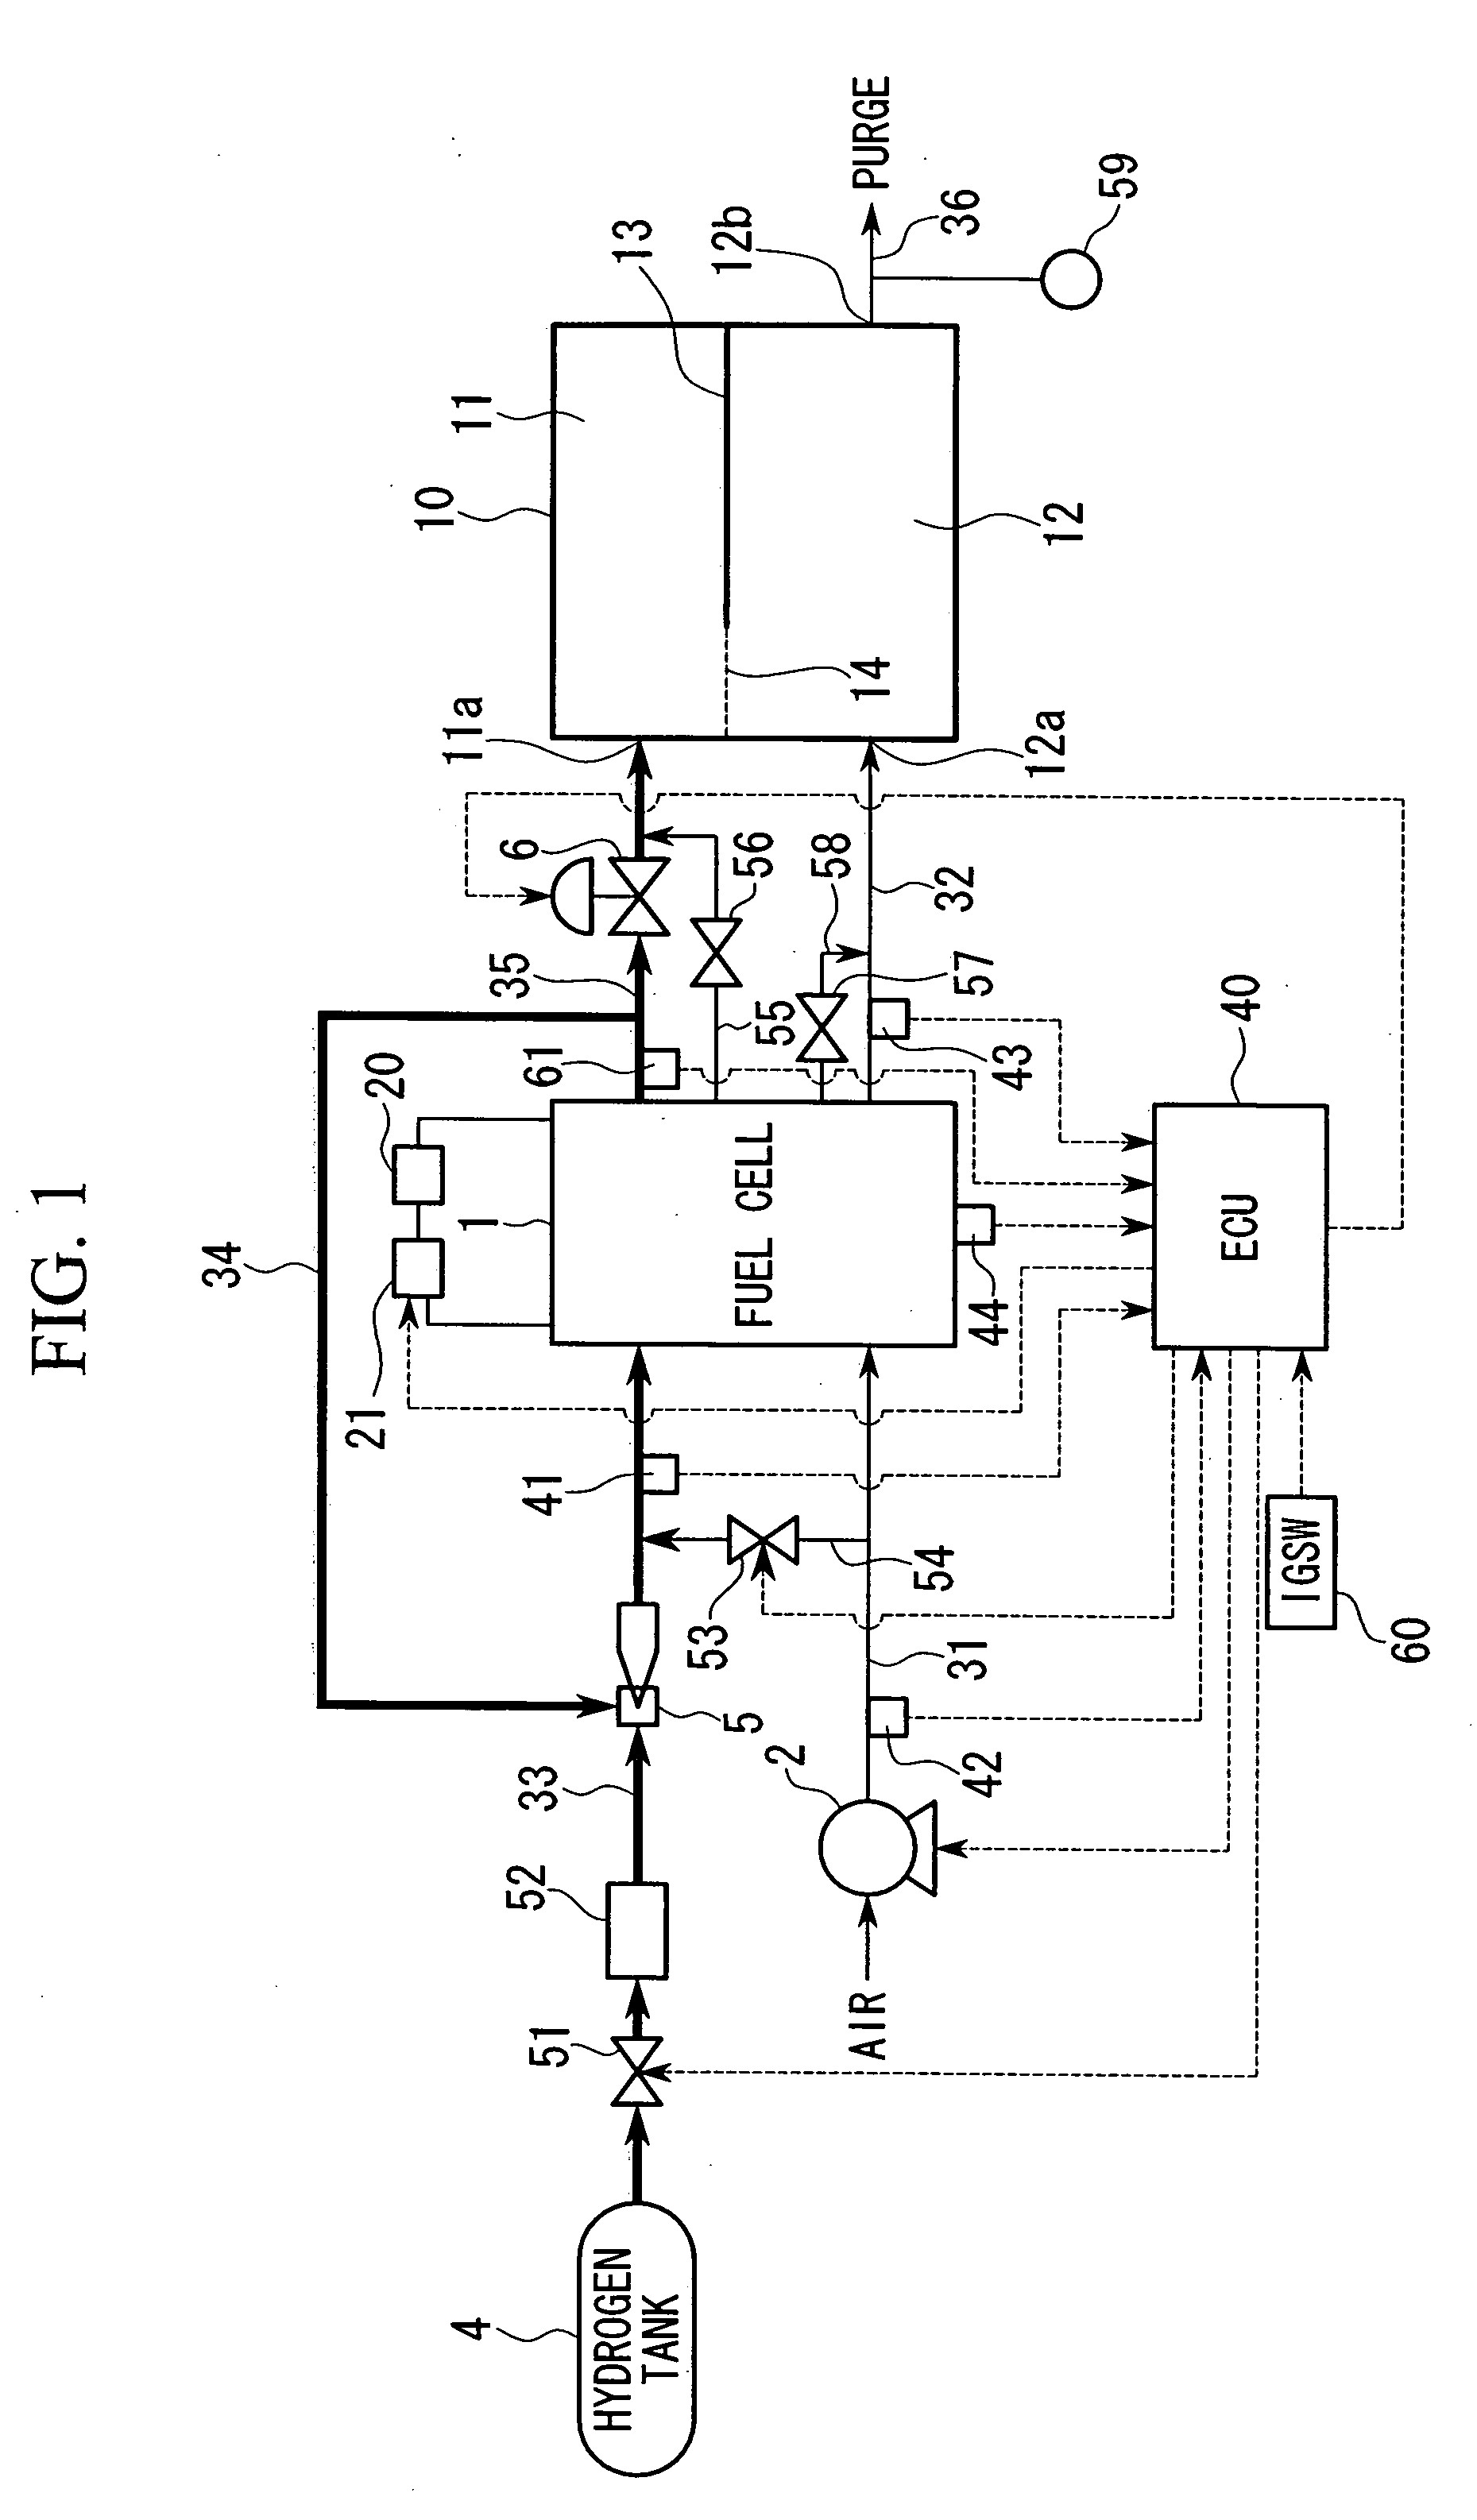 Stop method for fuel cell system and fuel cell system